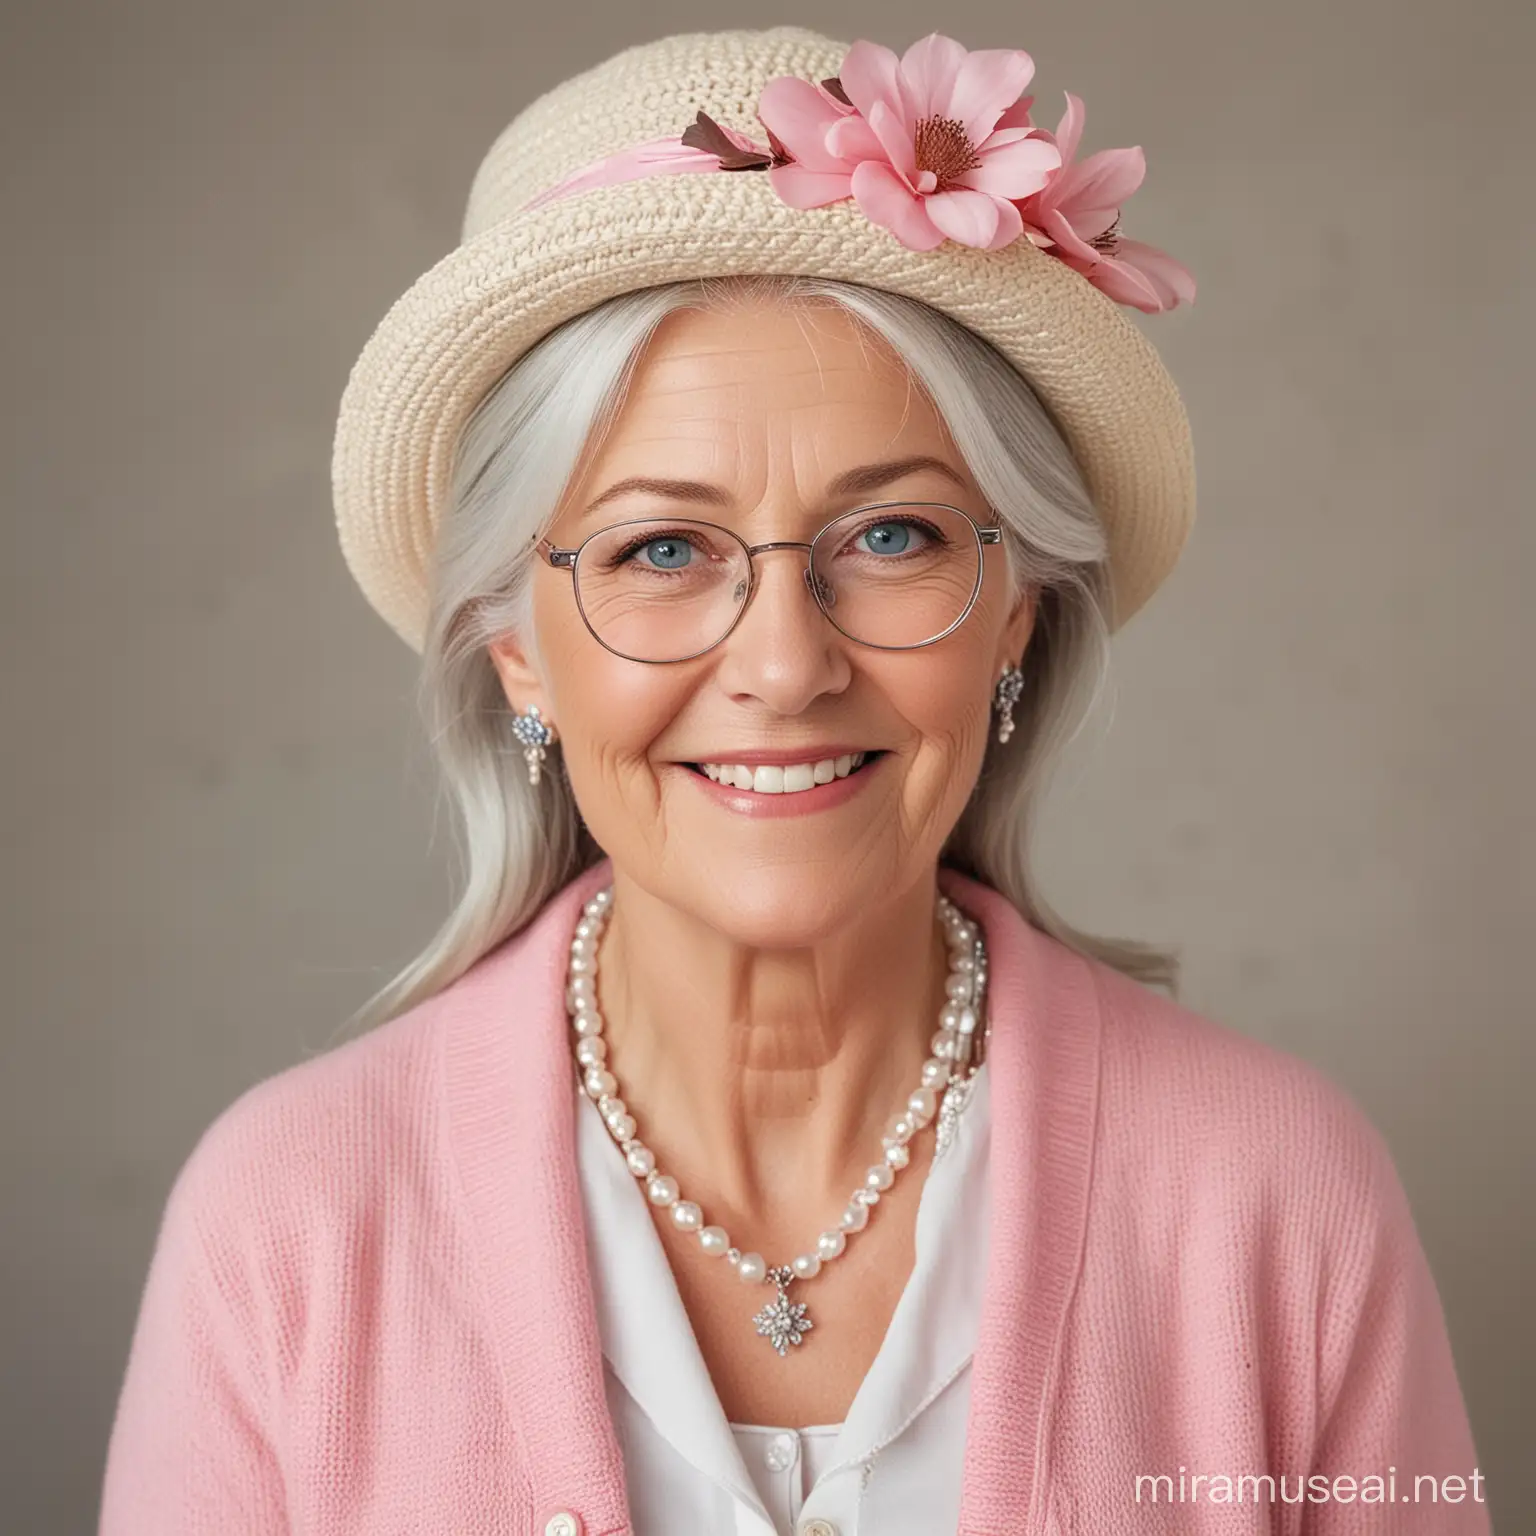 Elegant Senior Woman in Pink Dress and Pearl Jewelry with Glasses Chain and Floral Hat